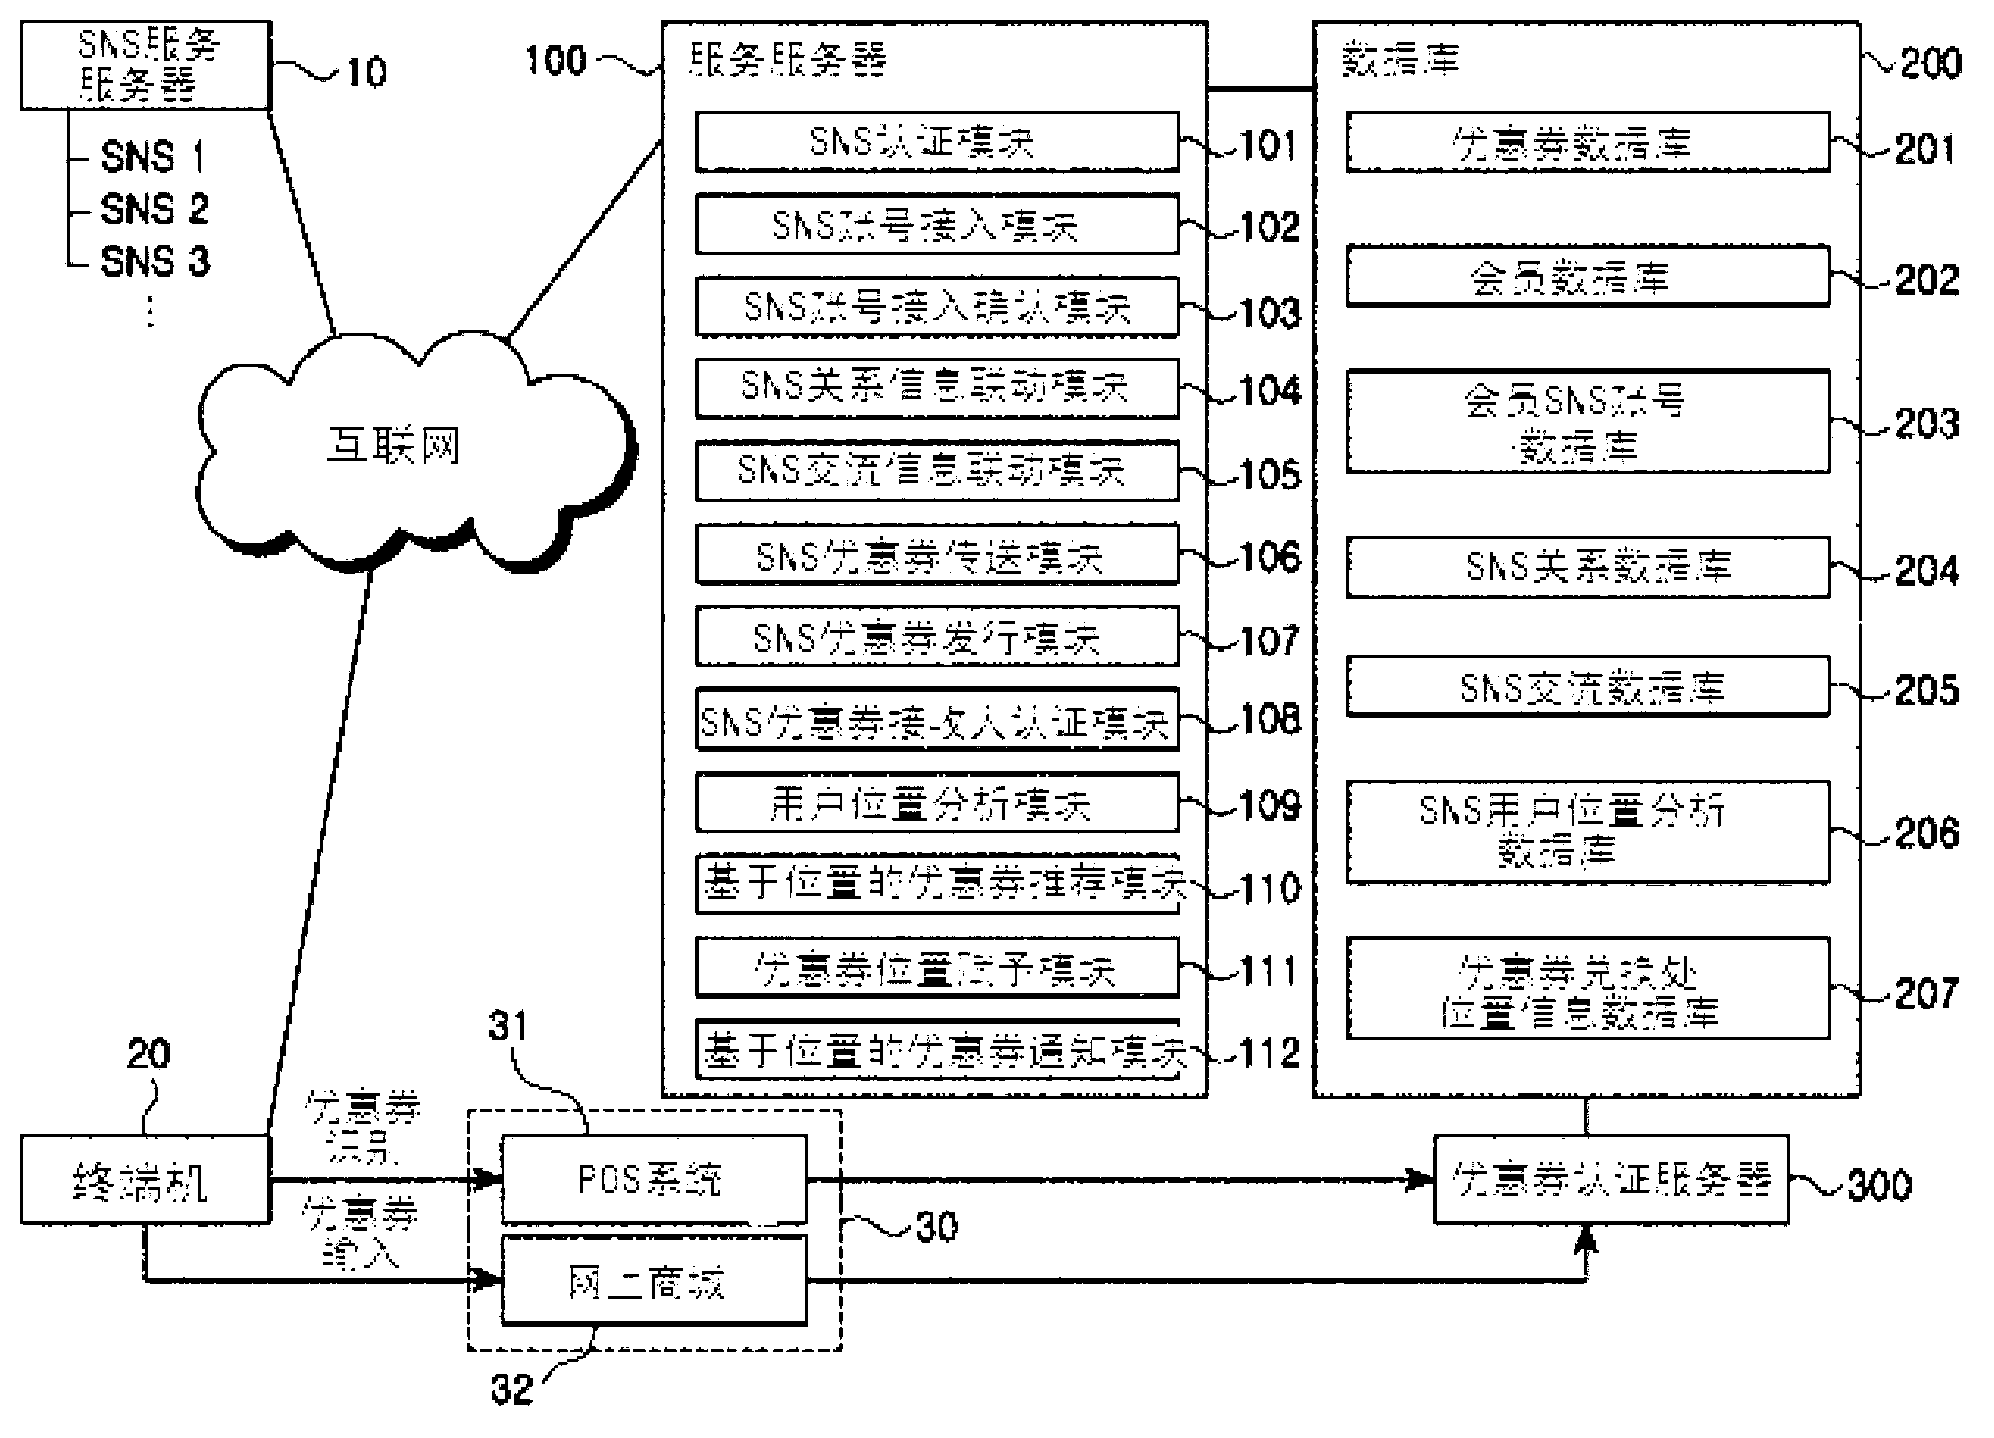 System and method for notifying and providing a coupon using sns information